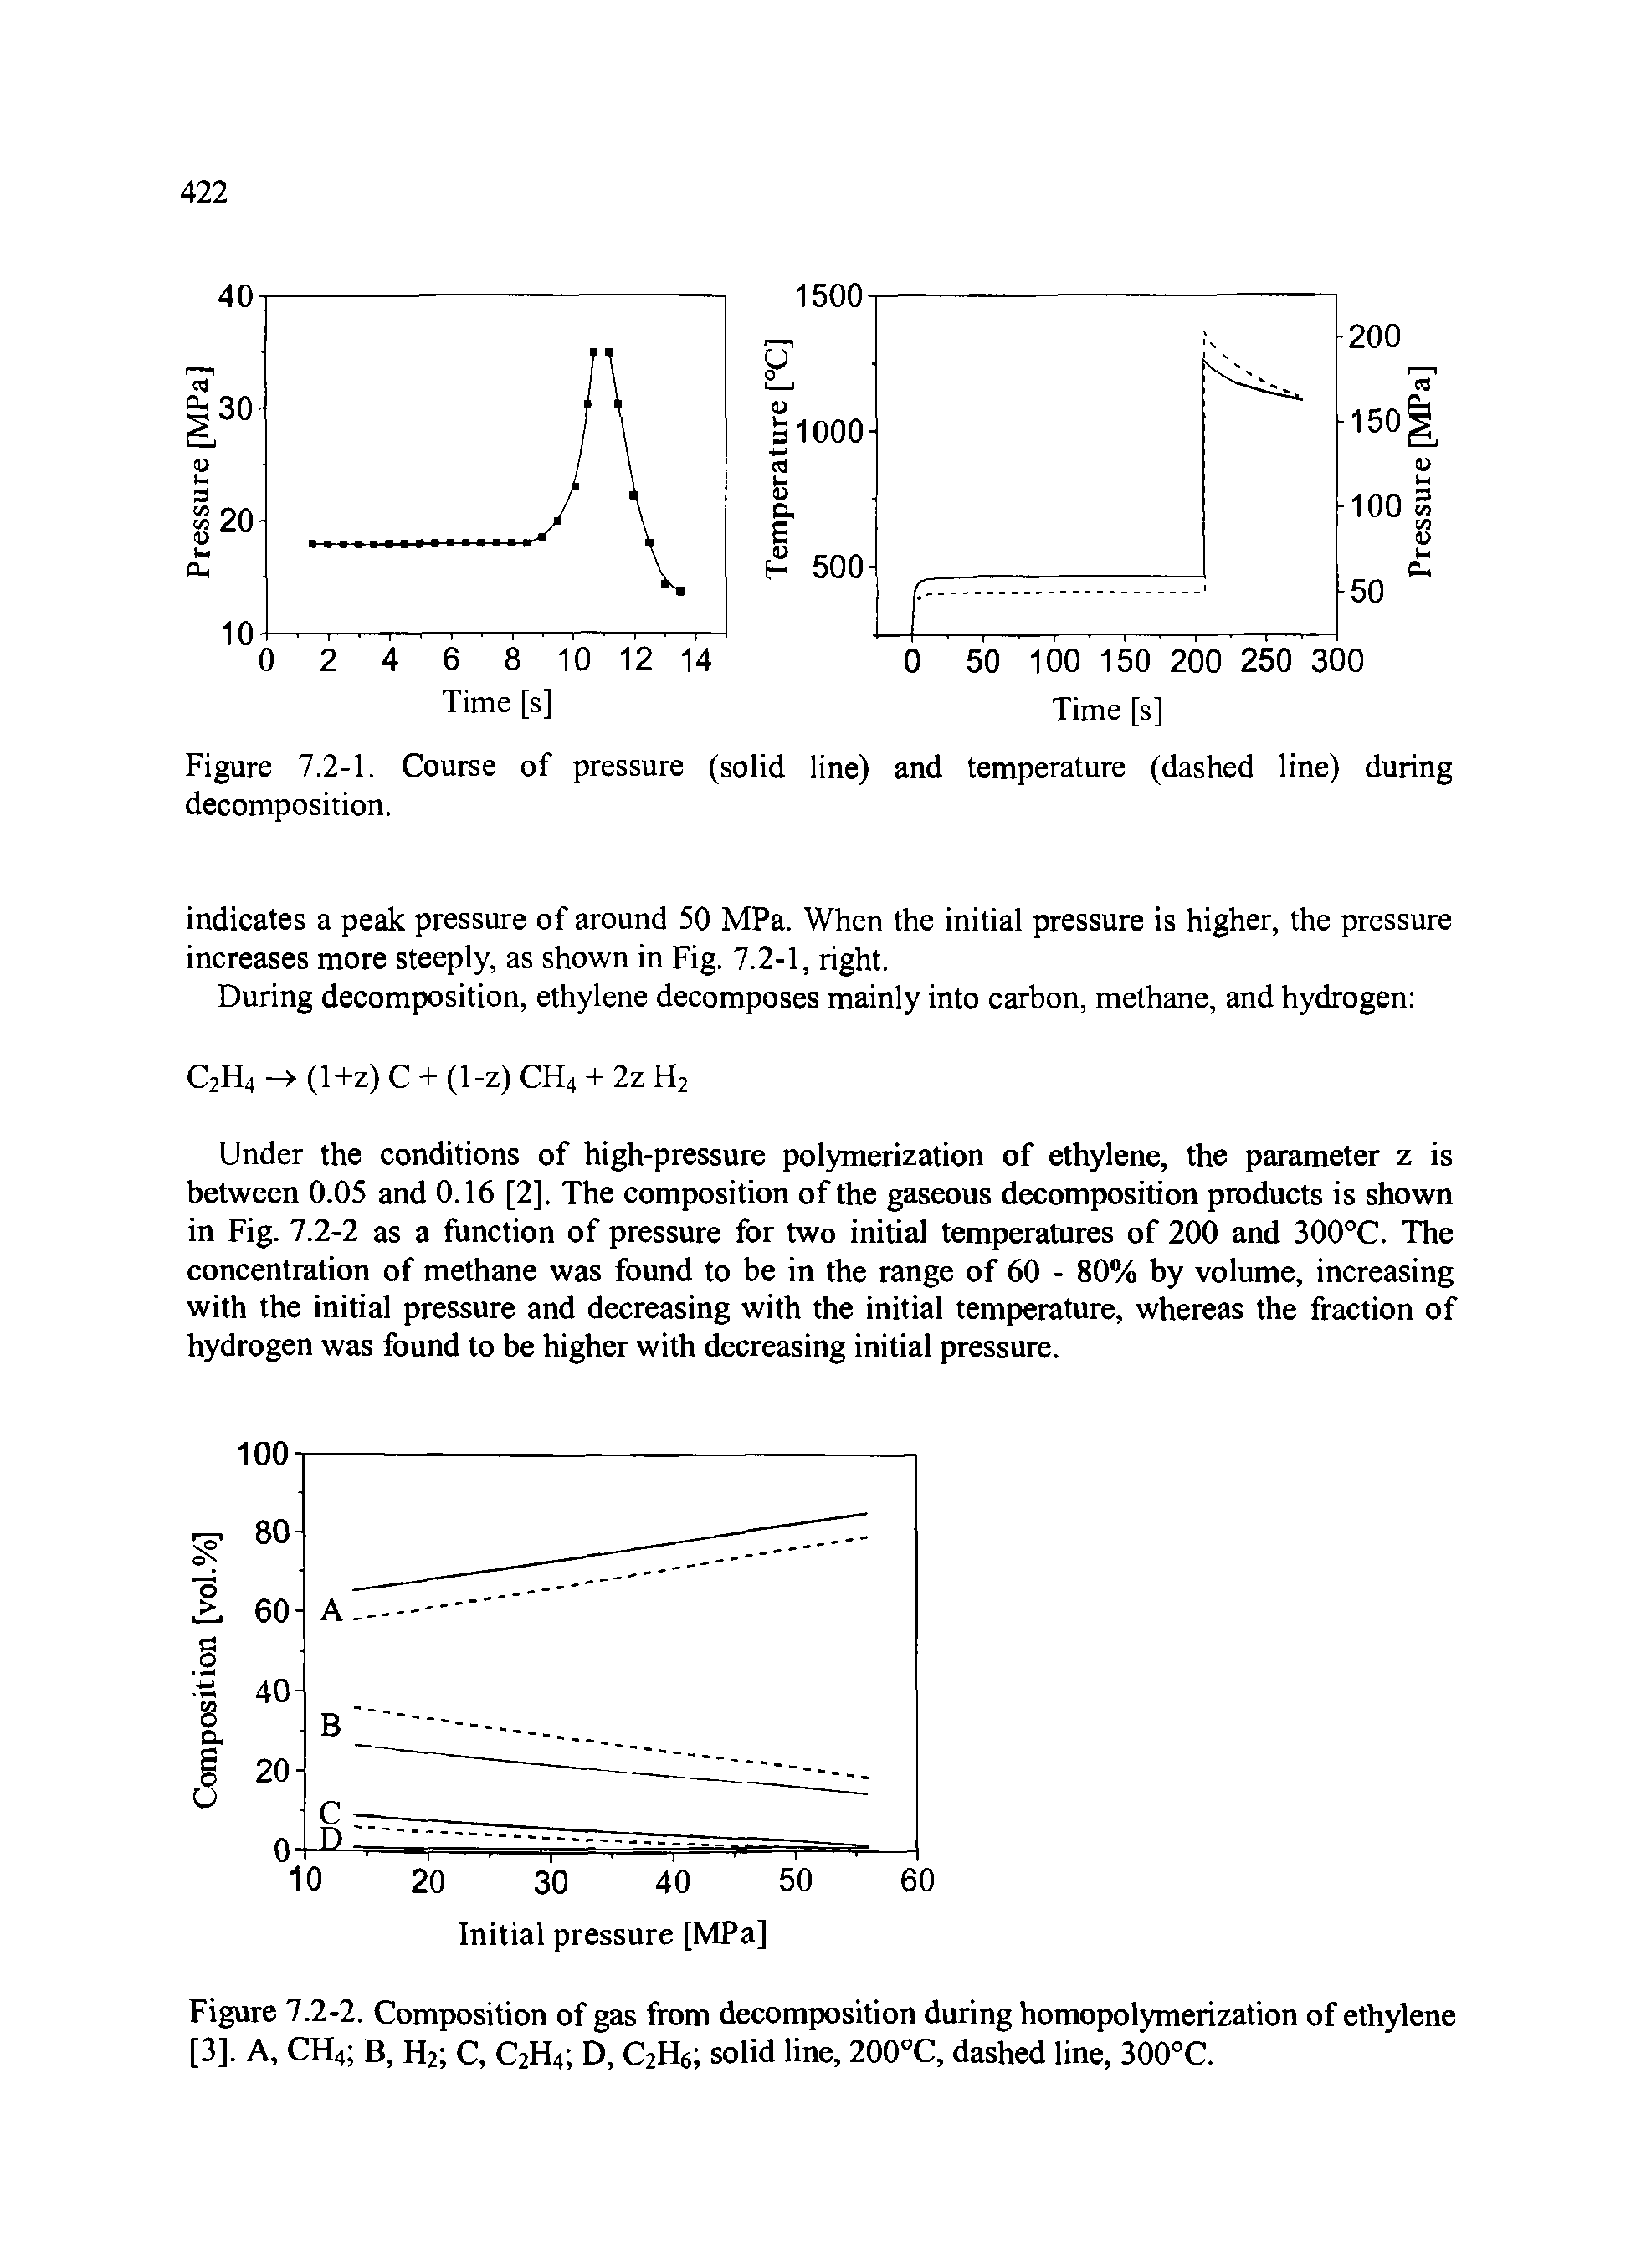 Figure 7.2-2. Composition of gas from decomposition during homopolymerization of ethylene [3]. A, CH4 B, H2 C, C2H4 D, C2H6 solid line, 200°C, dashed line, 300°C.